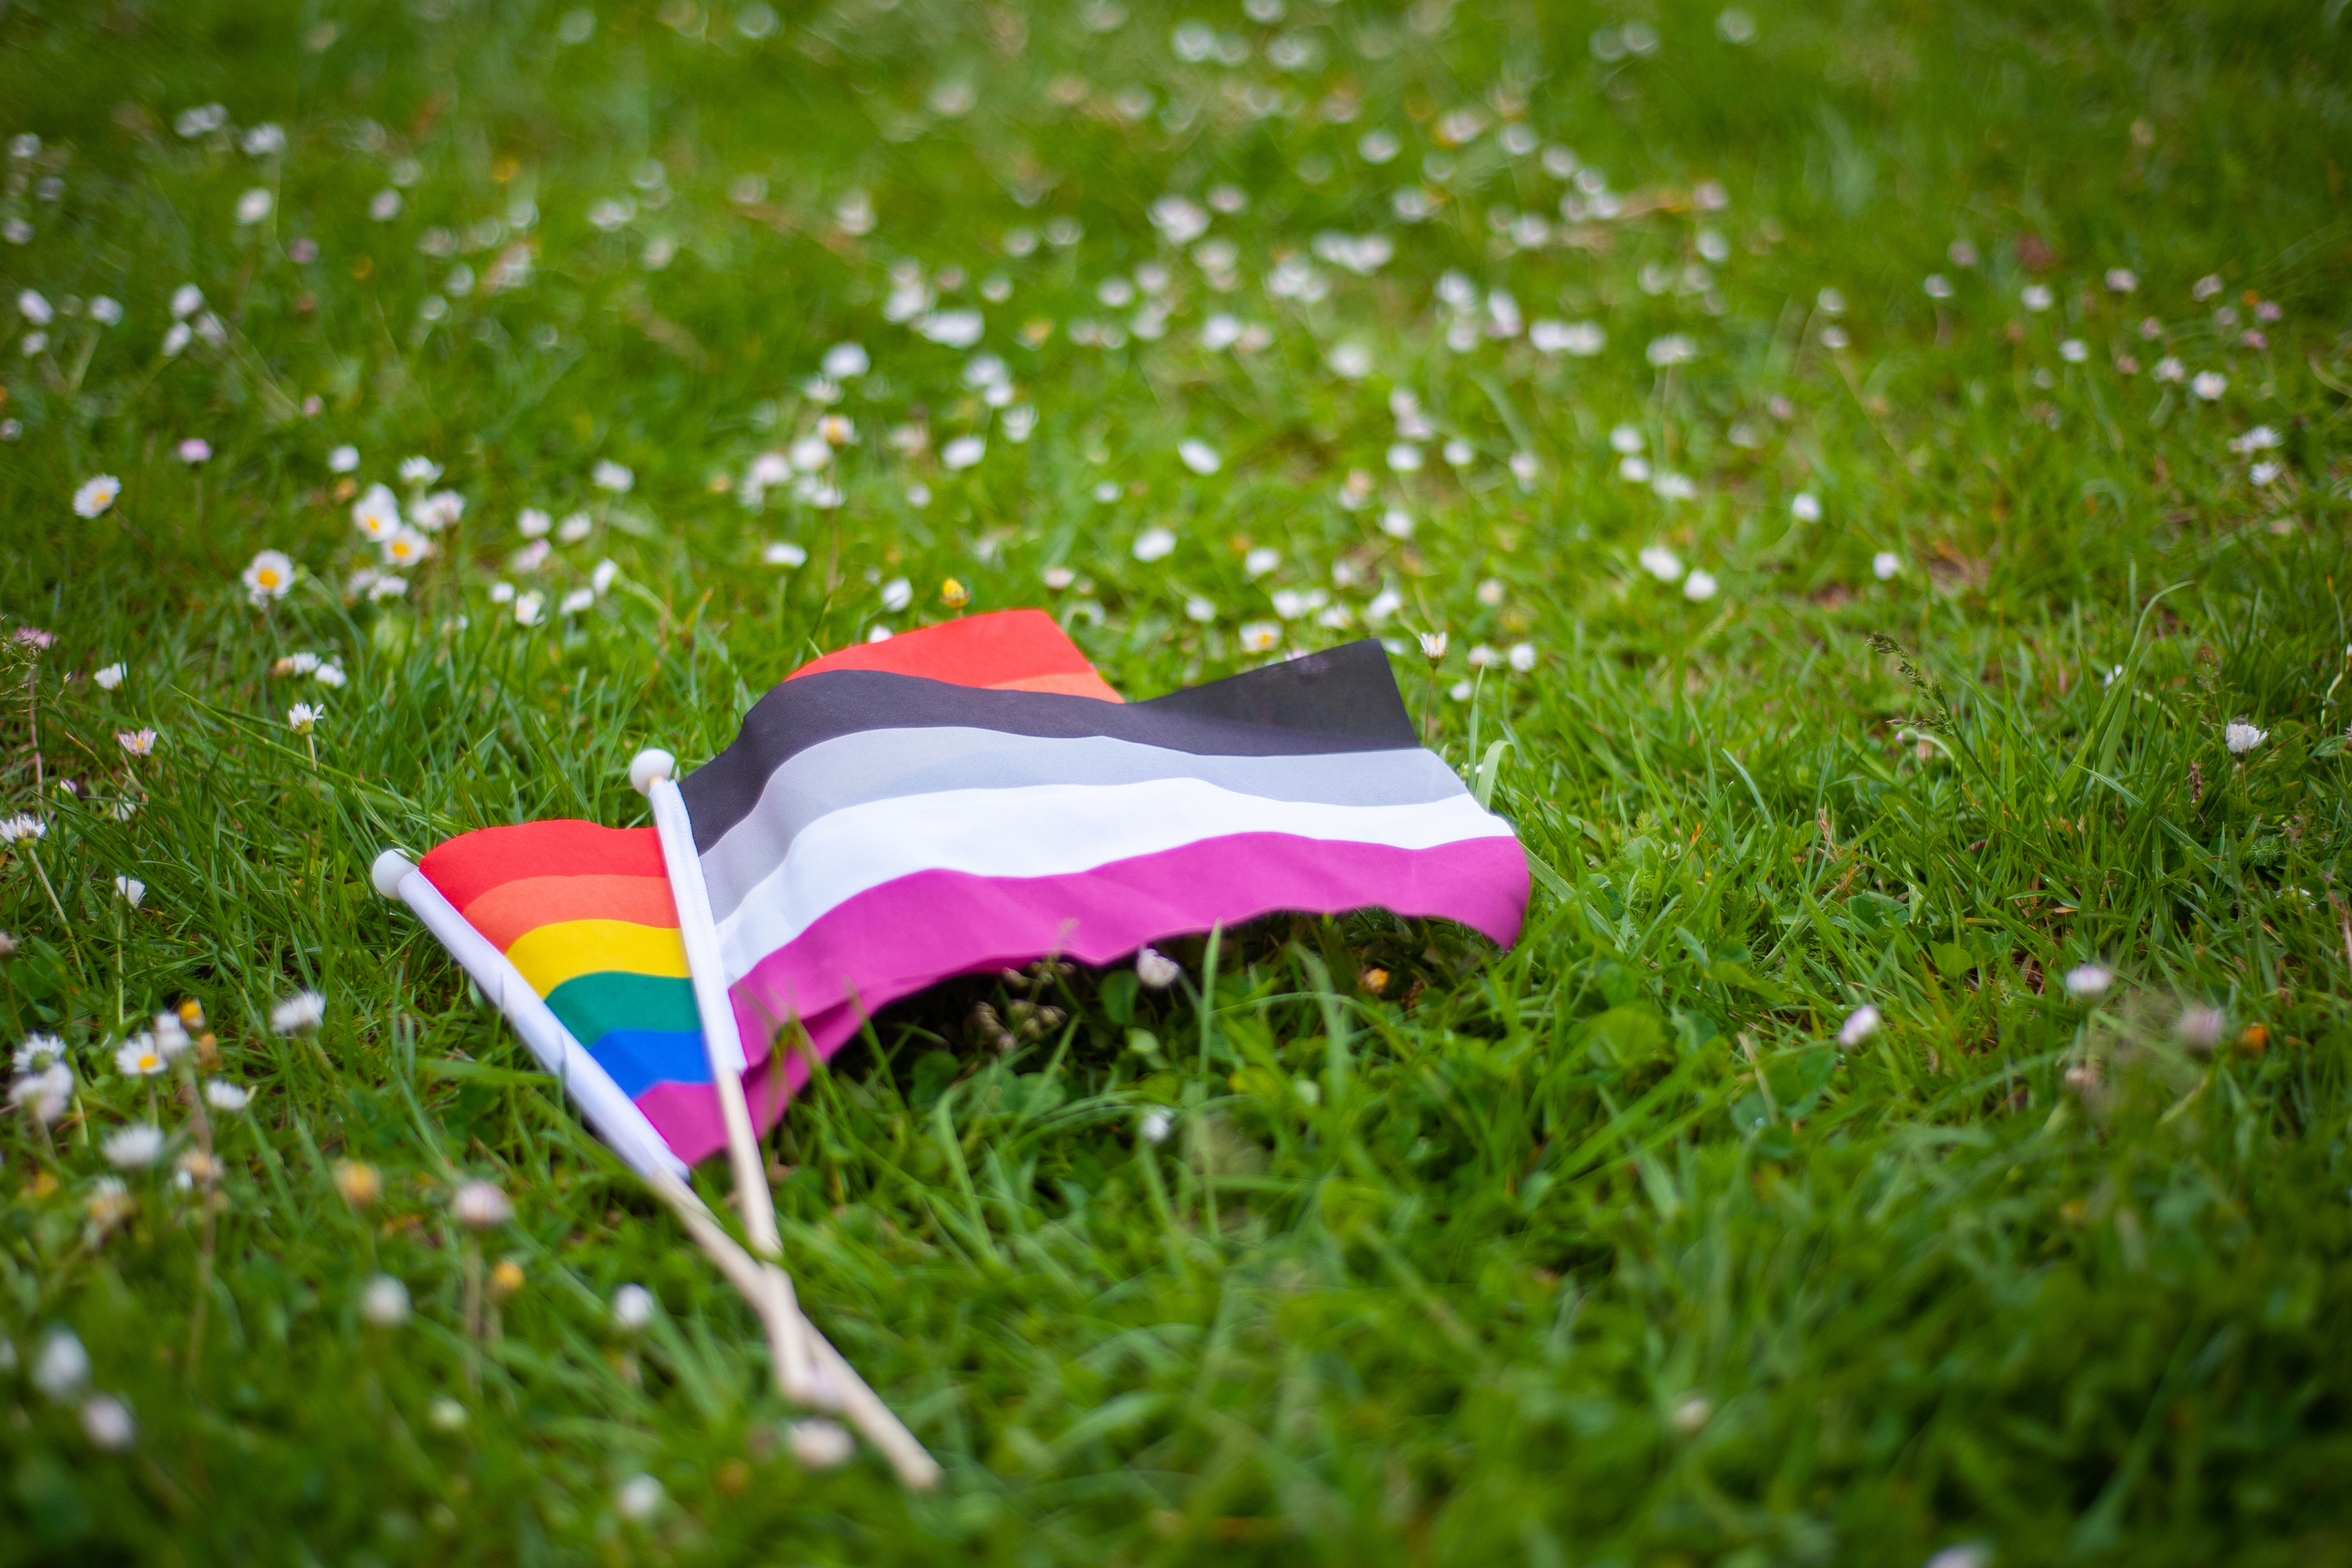 The rainbow LGBTQIA pride flag and the asexual pride flag together, lying in the grass intertwined